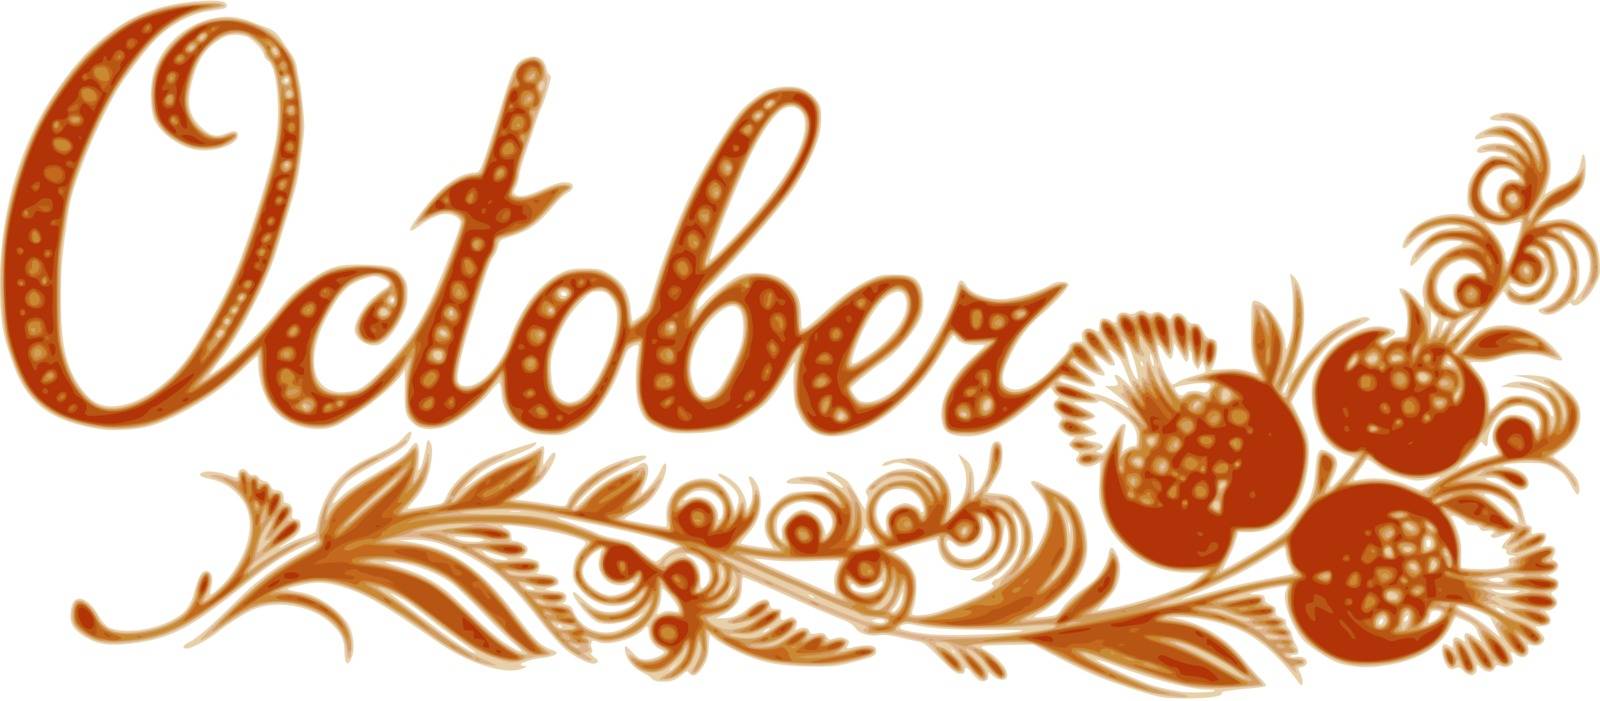 October the name of the month  by VectorFlover